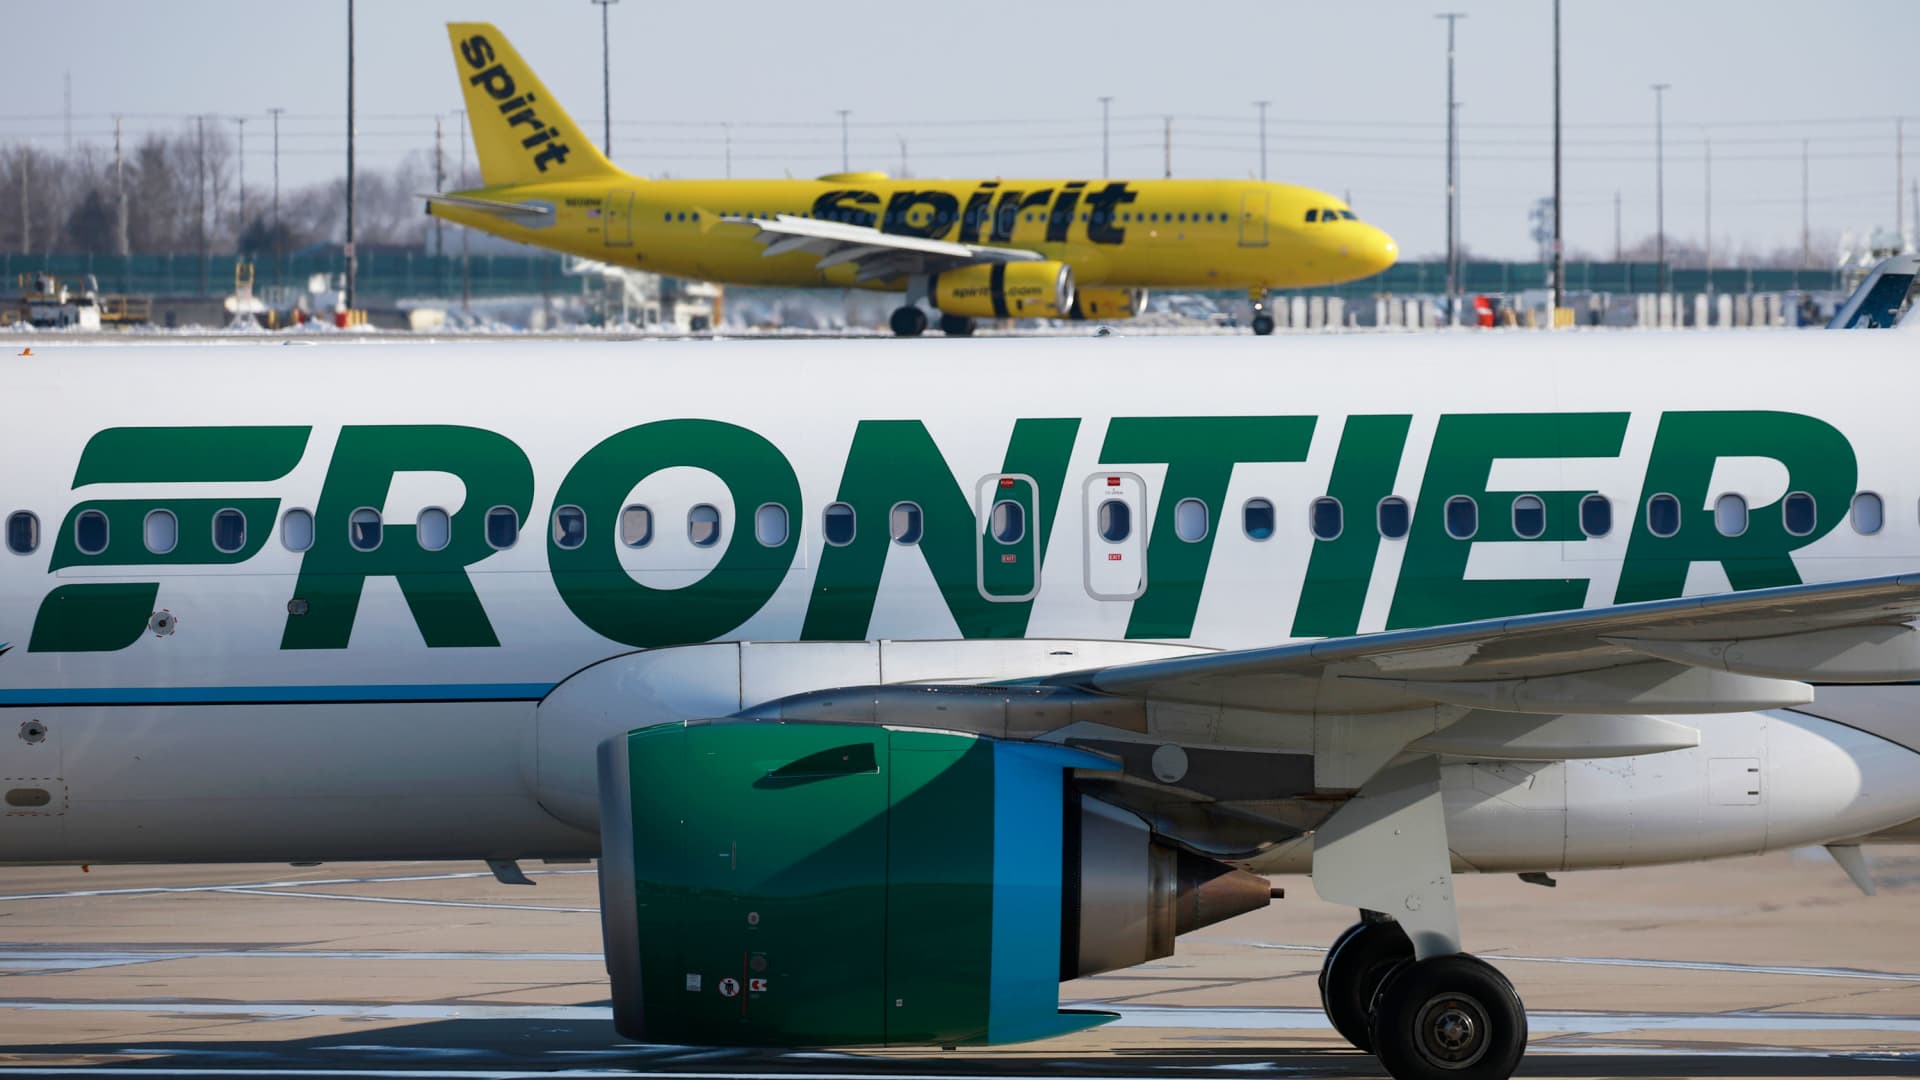 Spirit ends merger agreement with Frontier, continues takeover talks with JetBlue